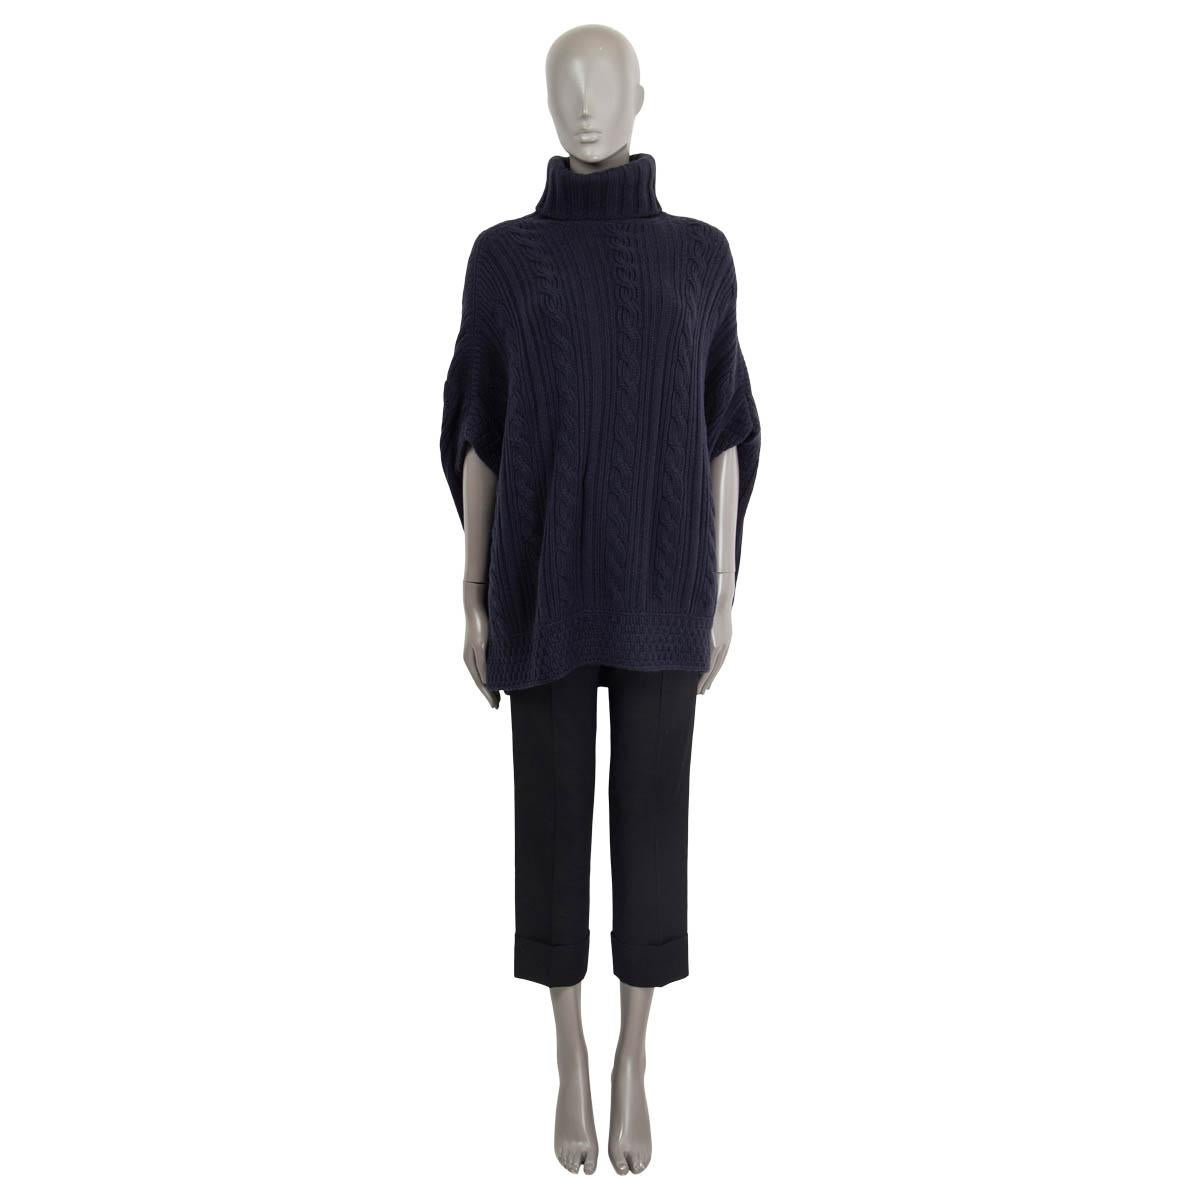 100% authentic Loro Piana oversized turtleneck cable knit poncho sweater in navy blue cashmere (100%). Has been worn and is in excellent condition. 

Measurements
Tag Size	42
Size	M
Shoulder Width	160cm (62.4in)
Bust From	170cm (66.3in)
Waist